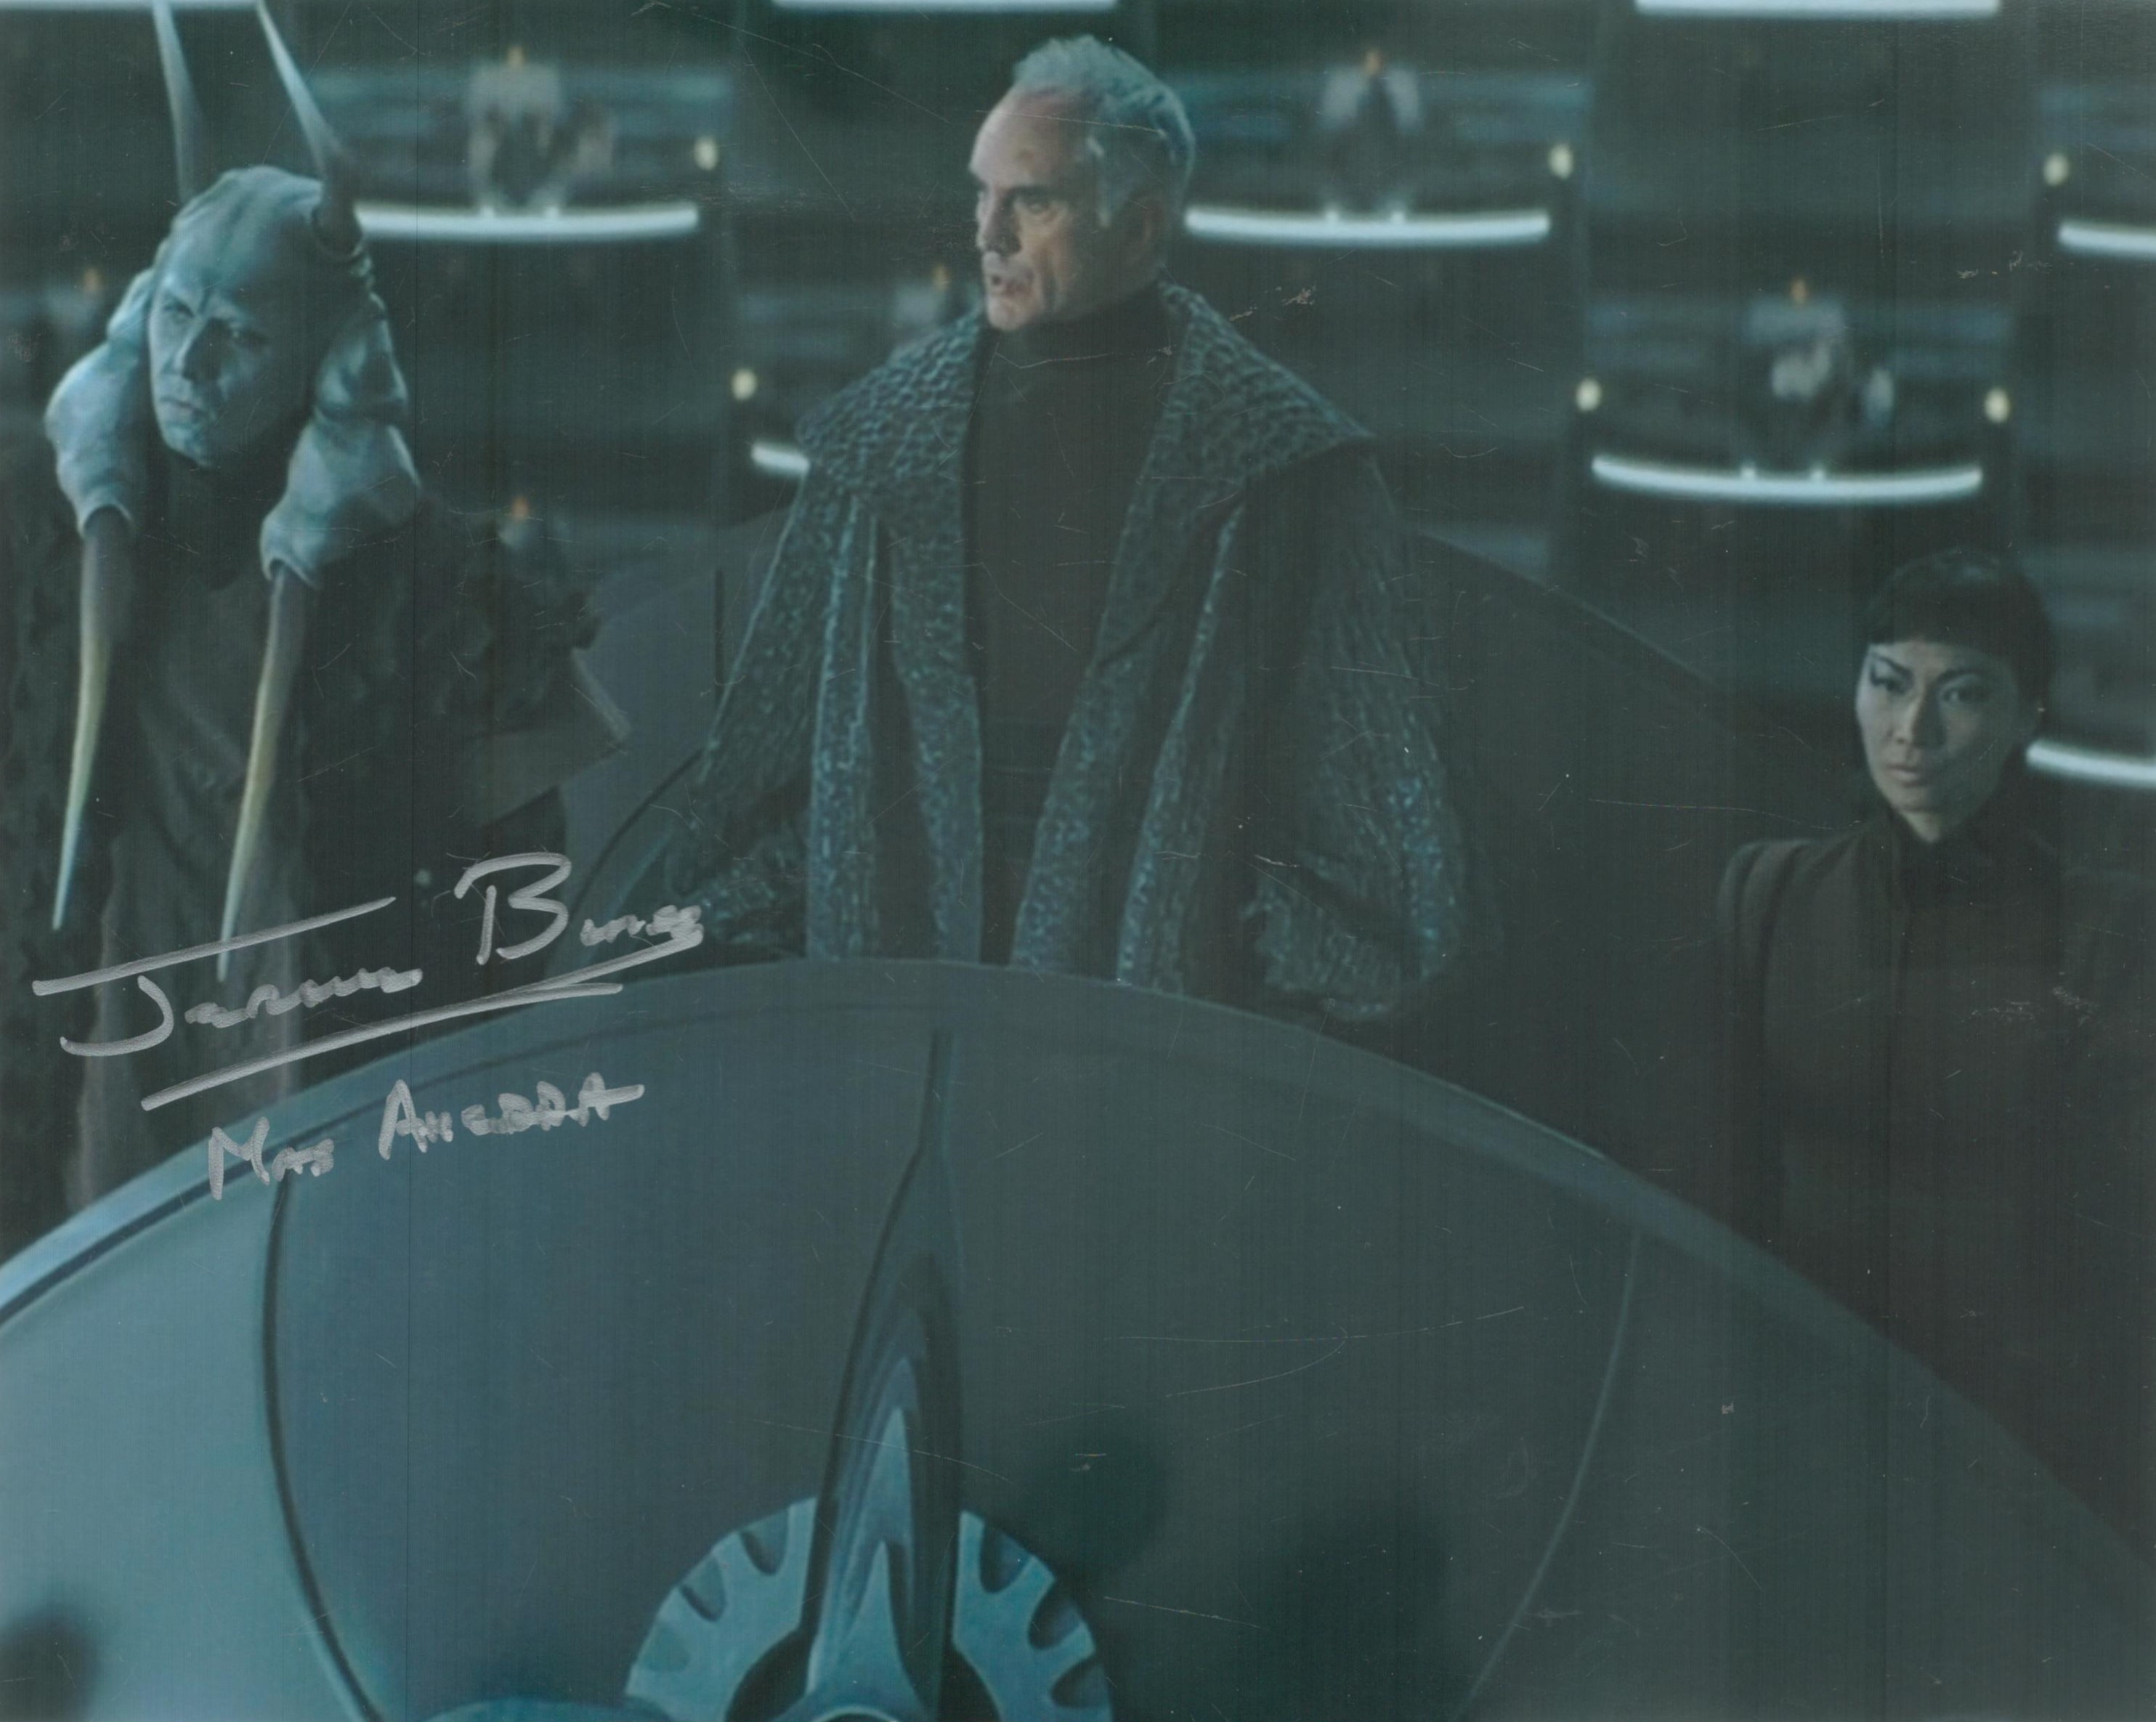 Star Wars Revenge of the Sith scene photo signed by Jerome Blake as Mas Amadda. Good Condition.